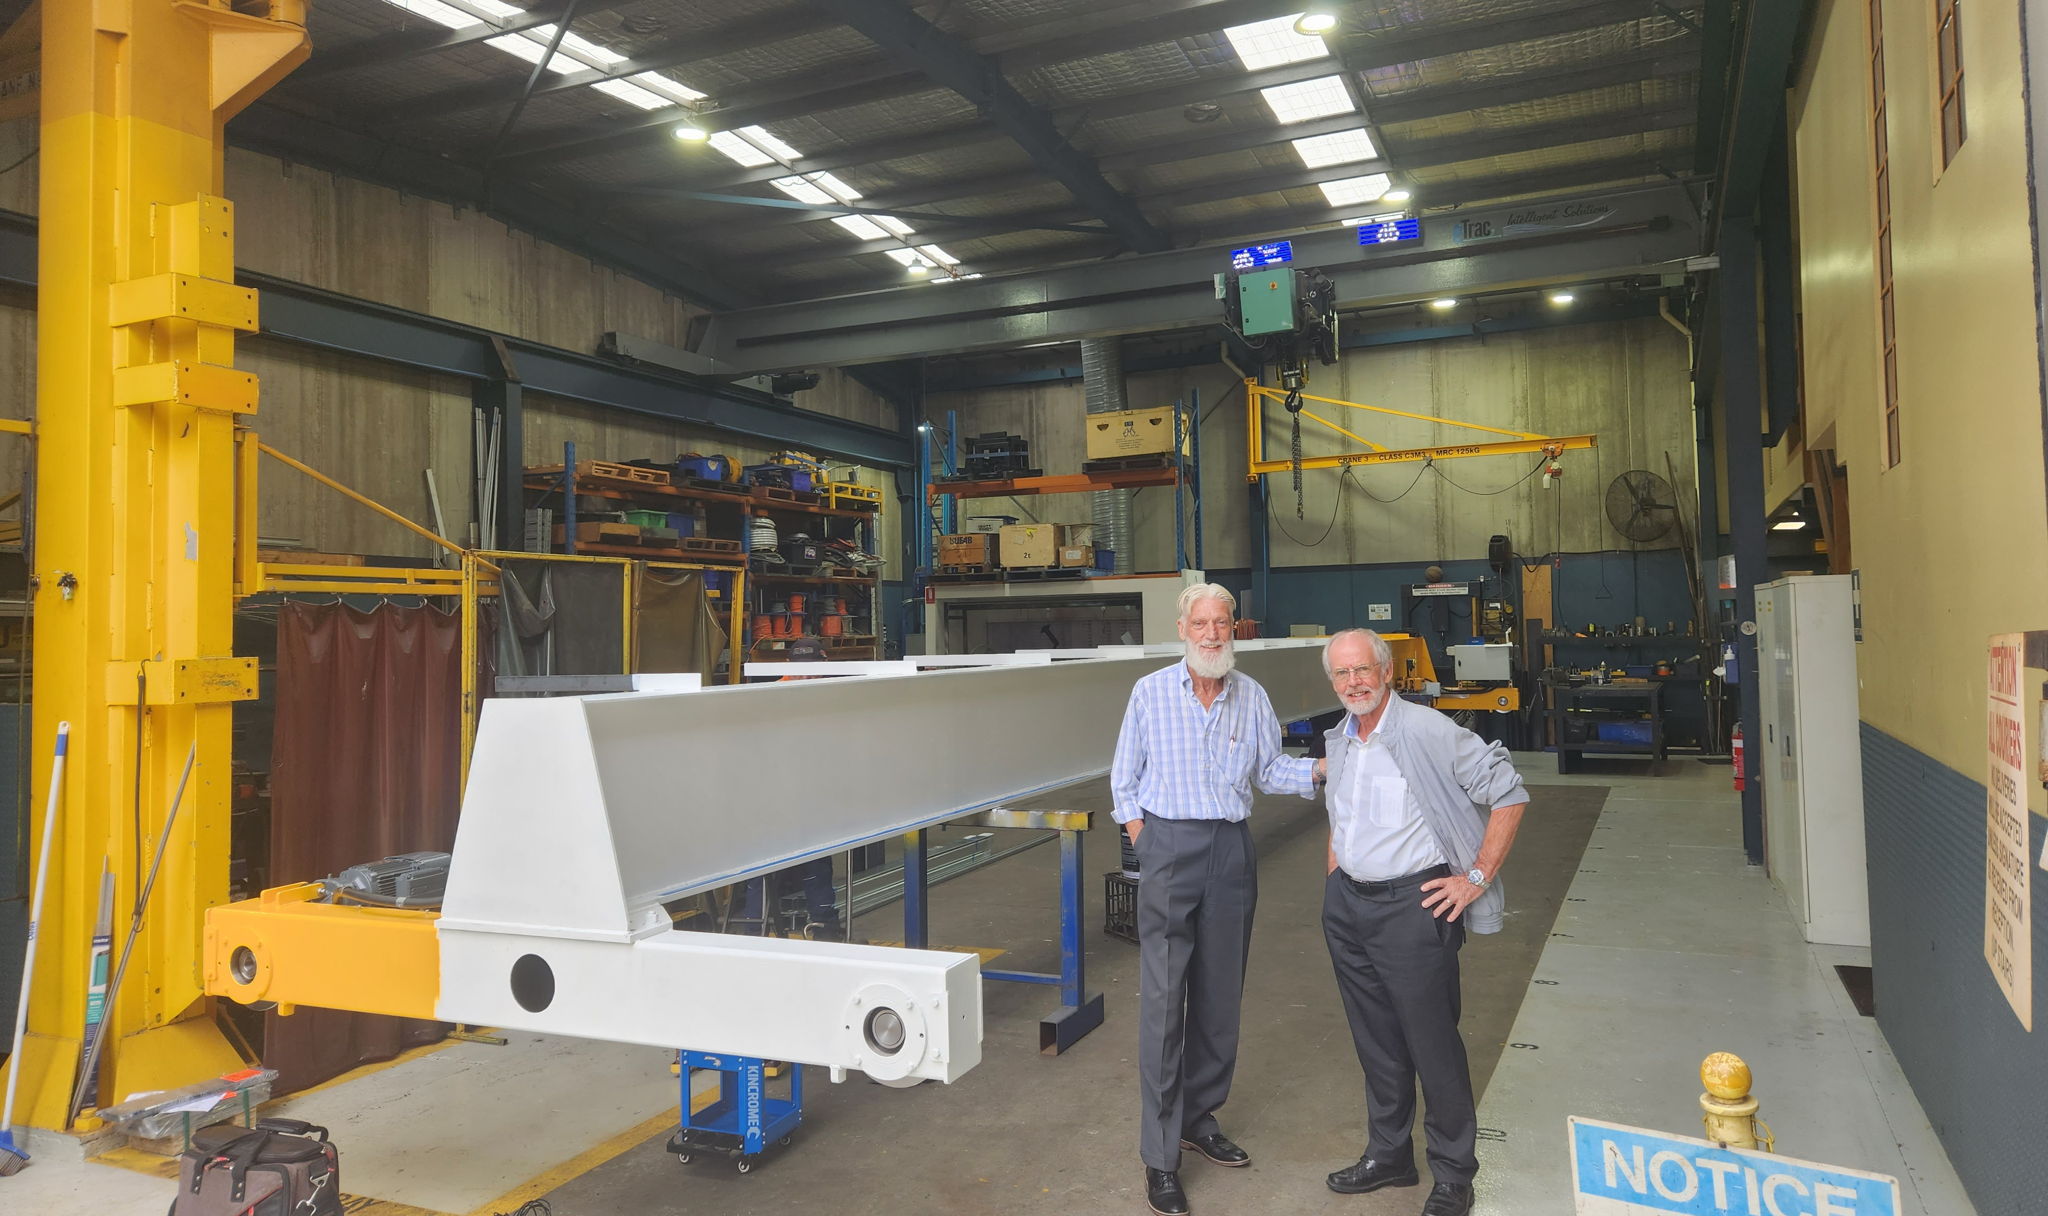 On the left: Brian Williams, owner of EMS. On the right: Joergen Moeller, Jebsen & Jessen Group together in the EMS facility in Sydney, Australia.